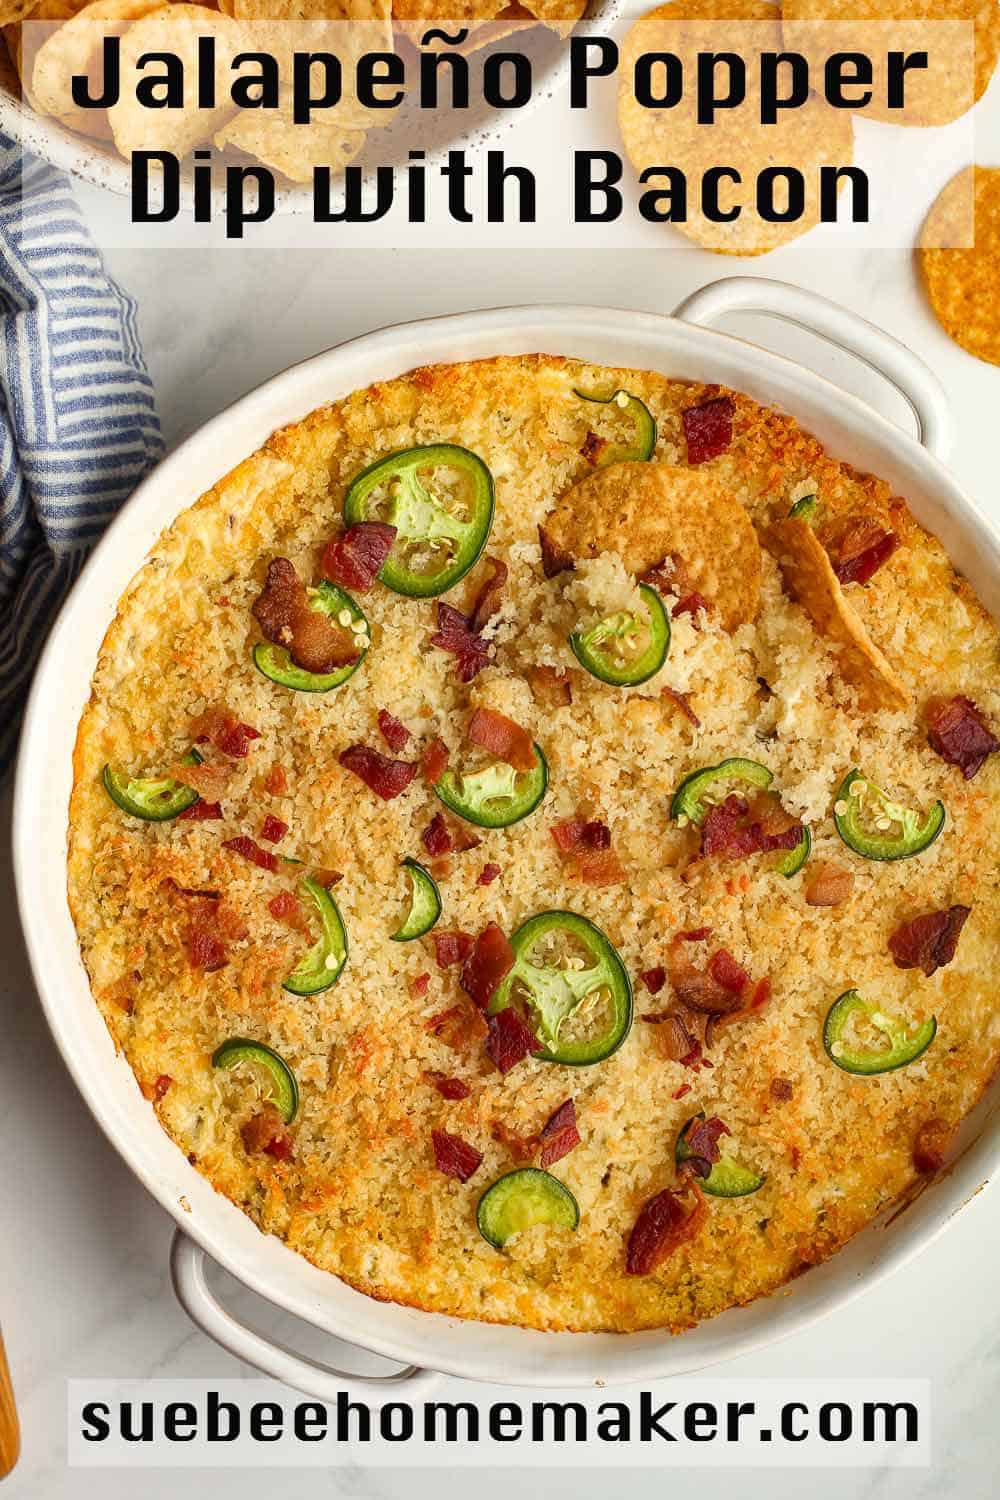 A dish of jalapeño popper dip with bacon.